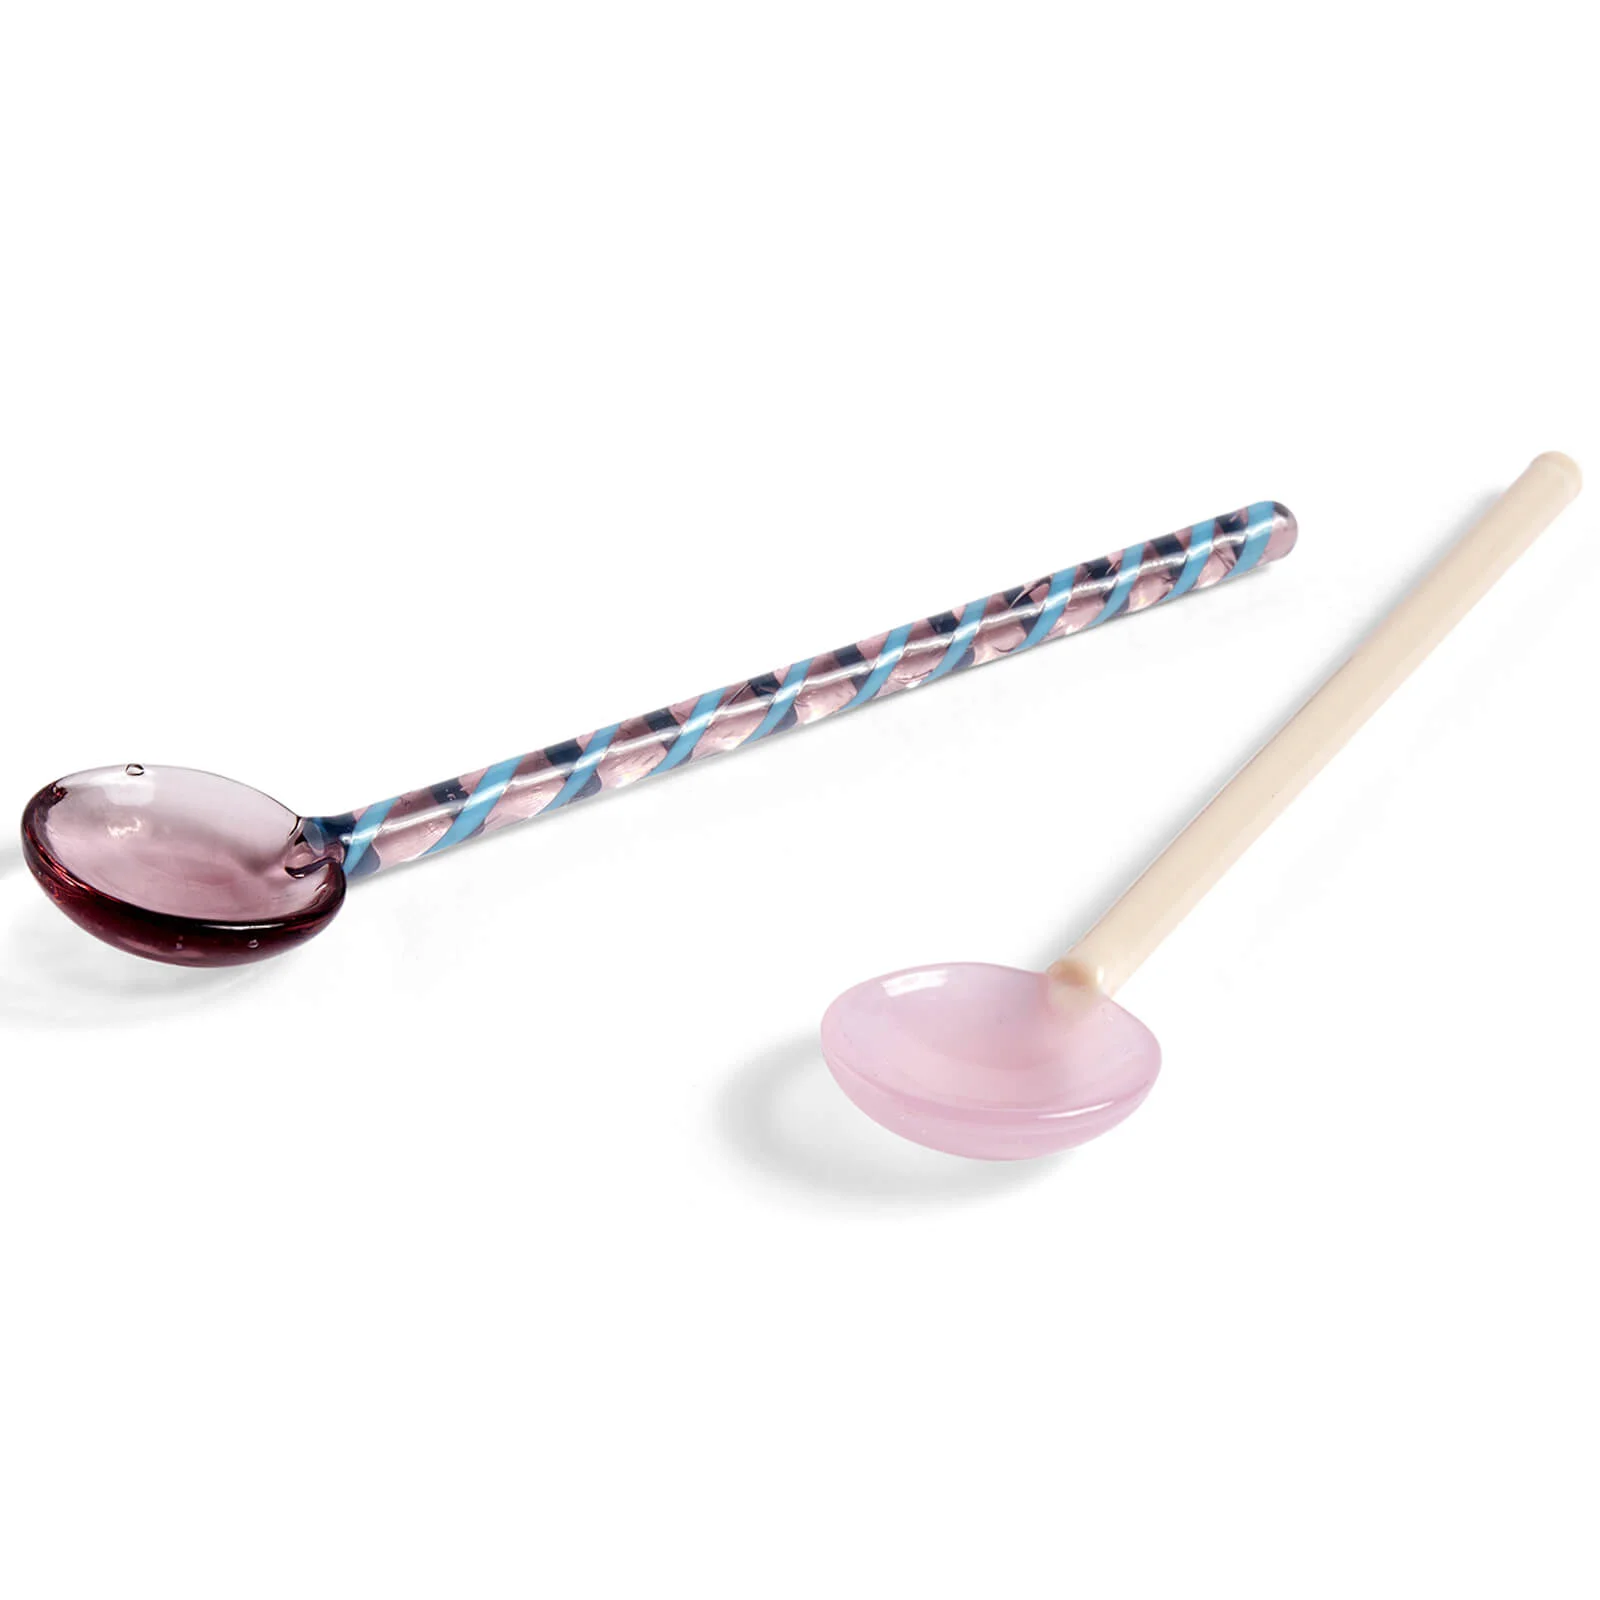 HAY Glass Spoons Round Set of 2 - Aubergine/Pink Image 1